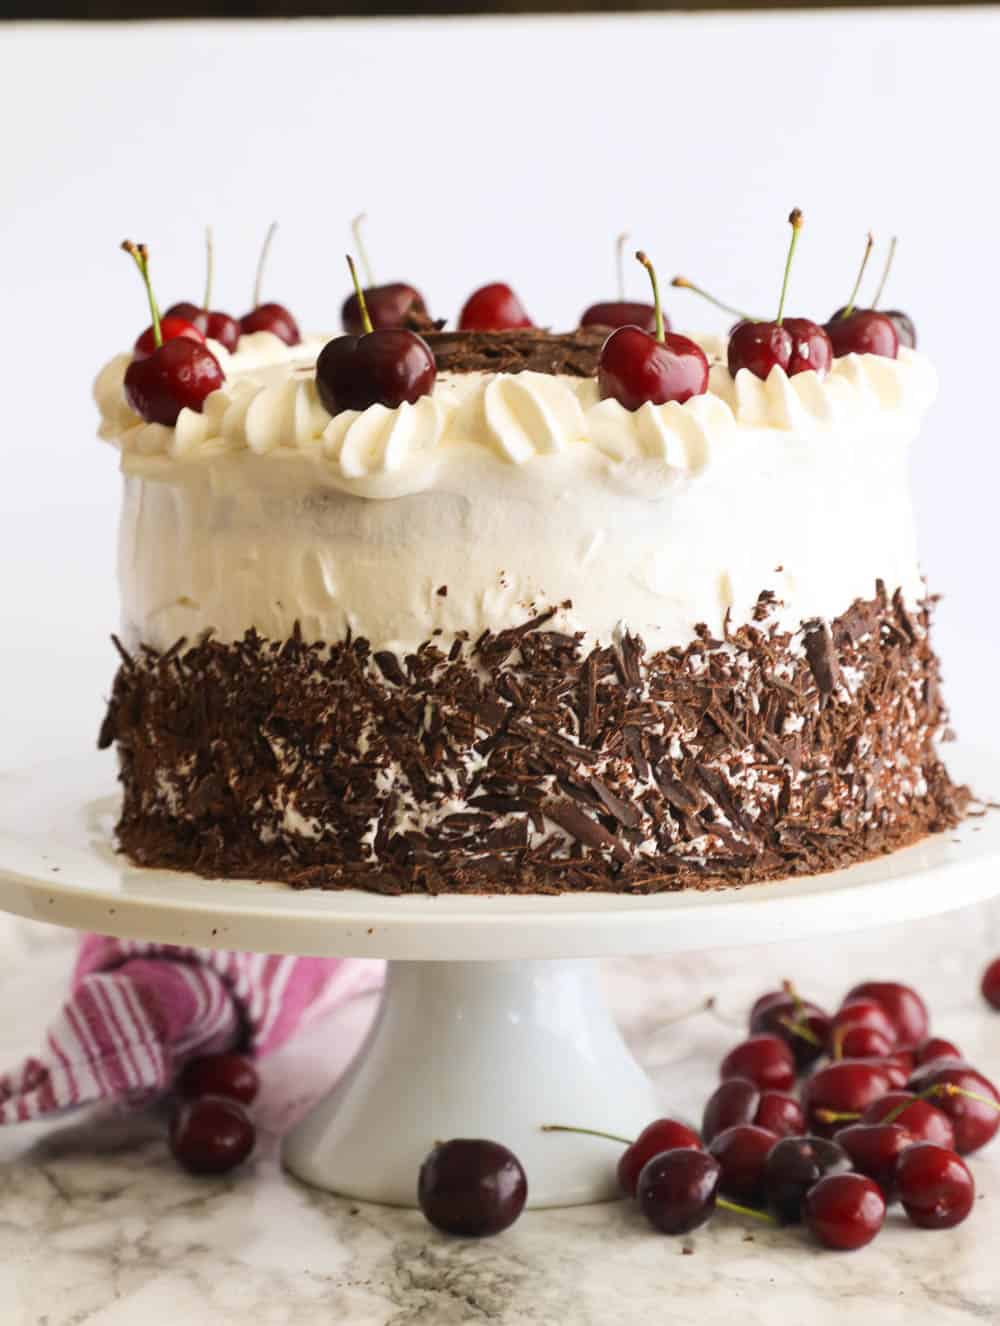 Black Forest Cake on a Cake Stand with Some Cherries in the Background